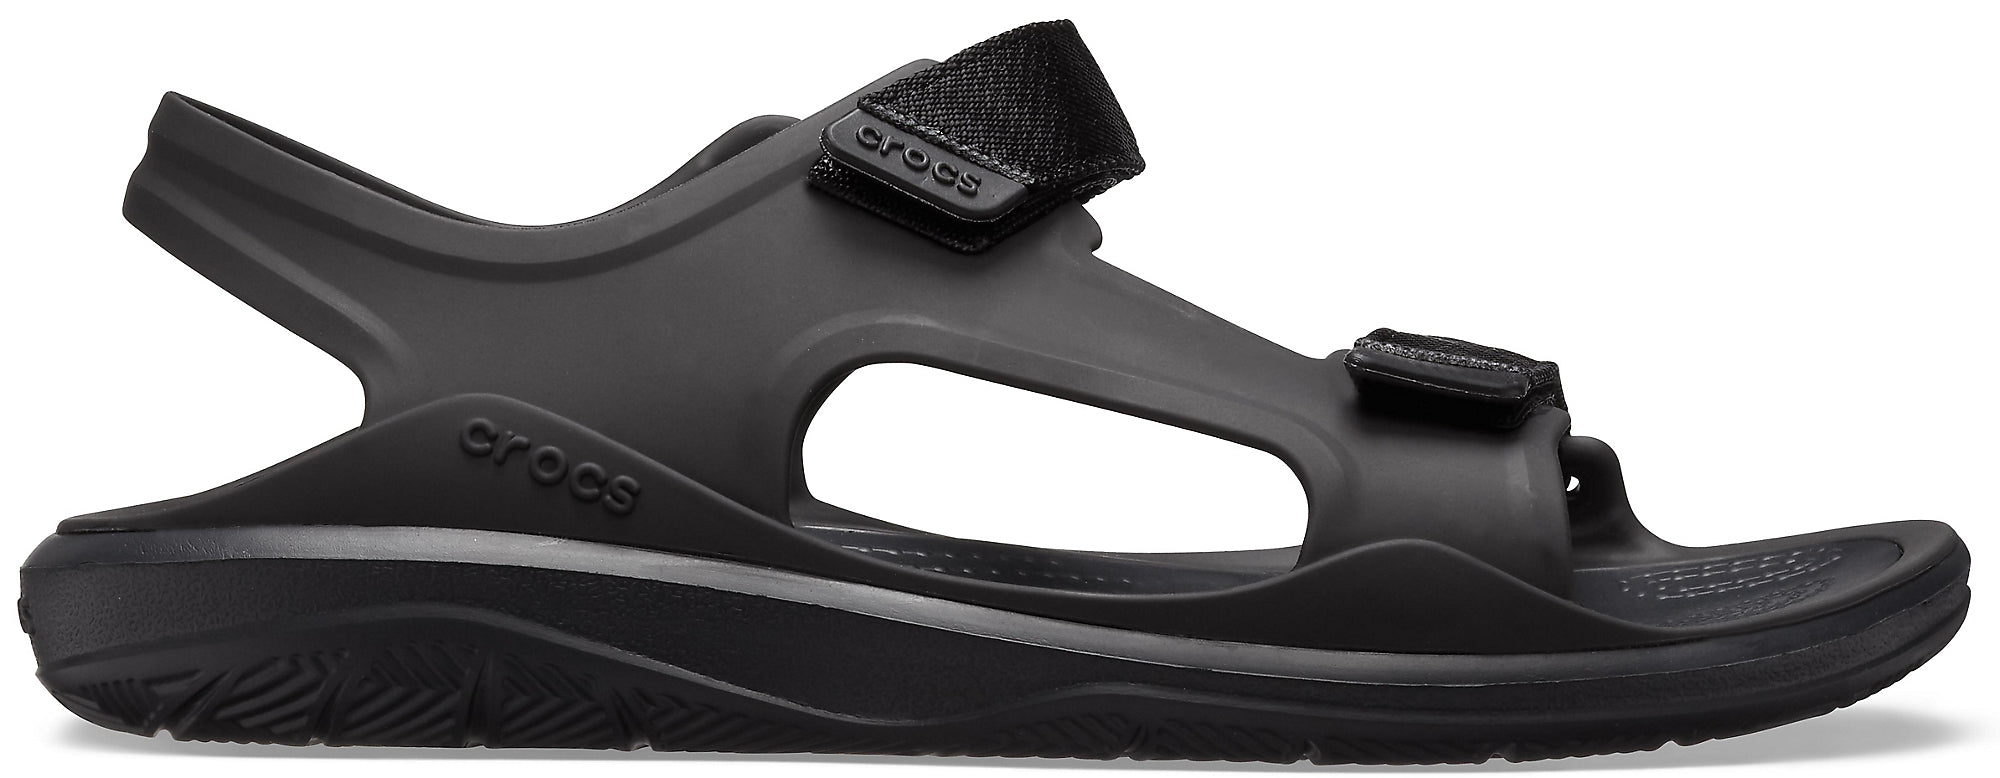 Swiftwater Expedition Sandal W Black/Black